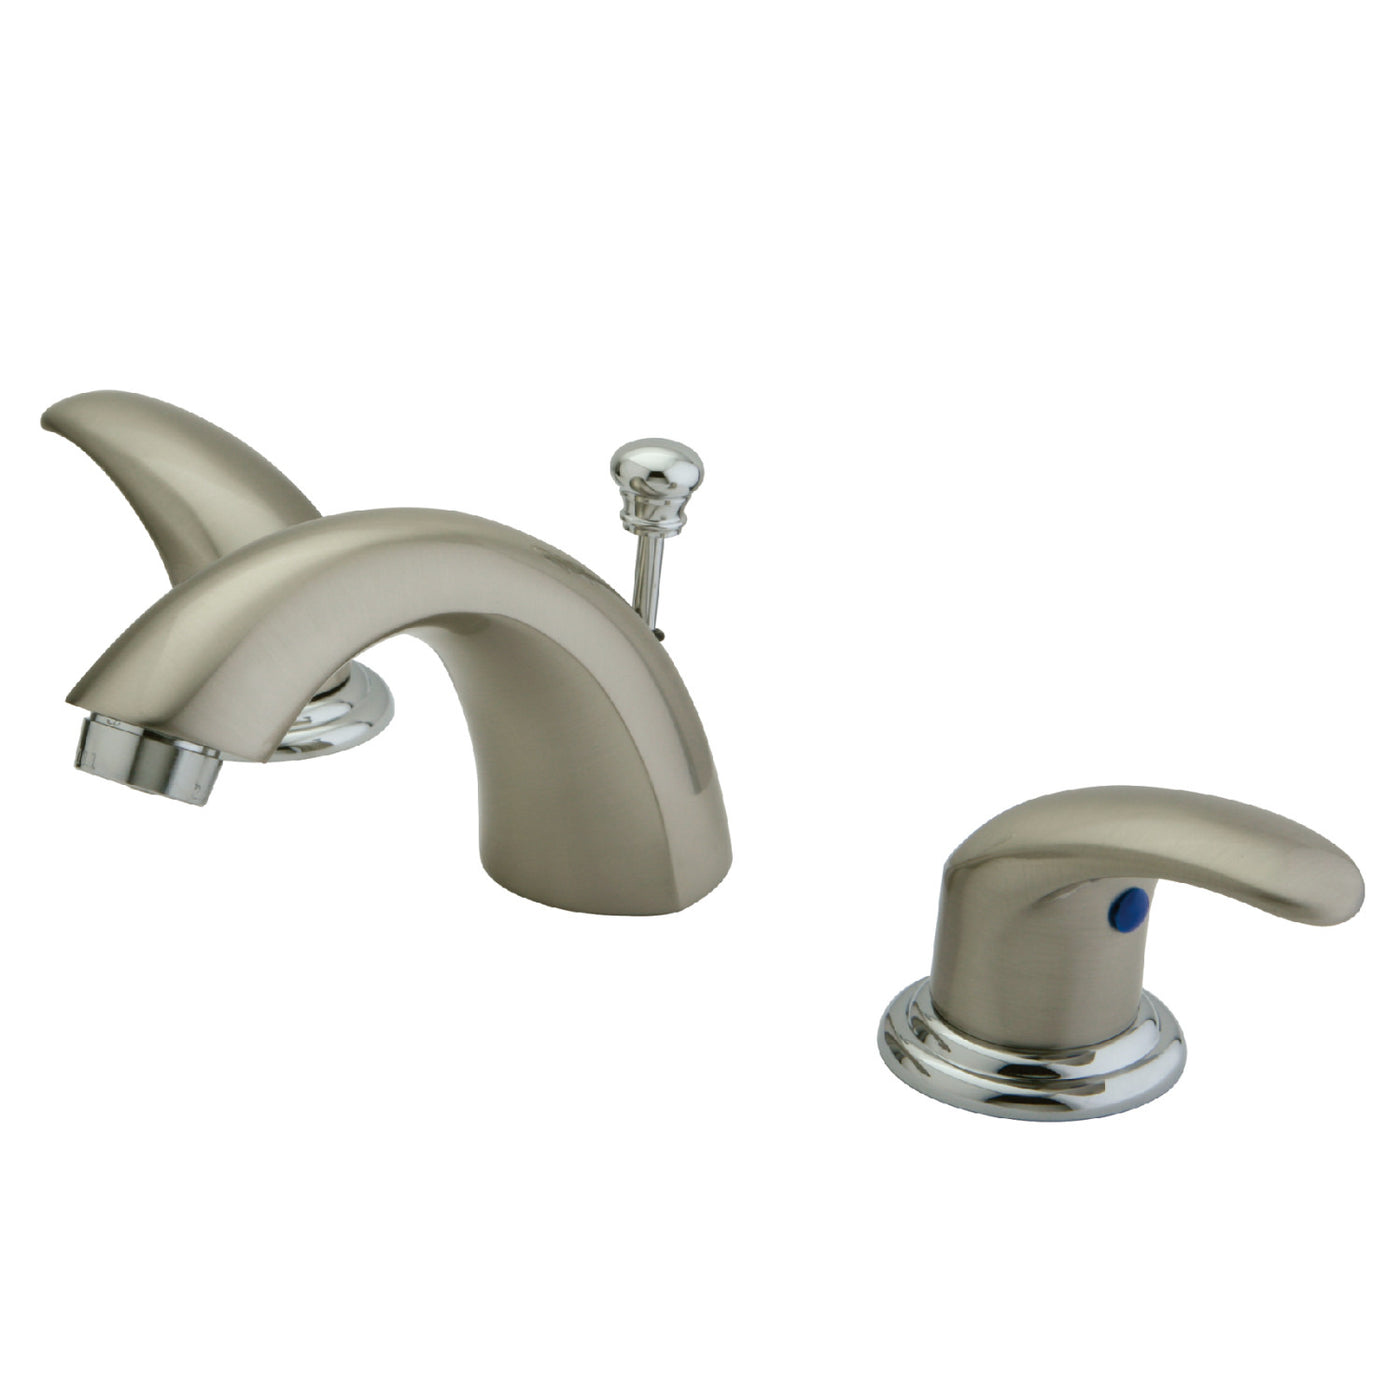 Elements of Design EB6957LL Mini-Widespread Bathroom Faucet, Brushed Nickel/Polished Chrome